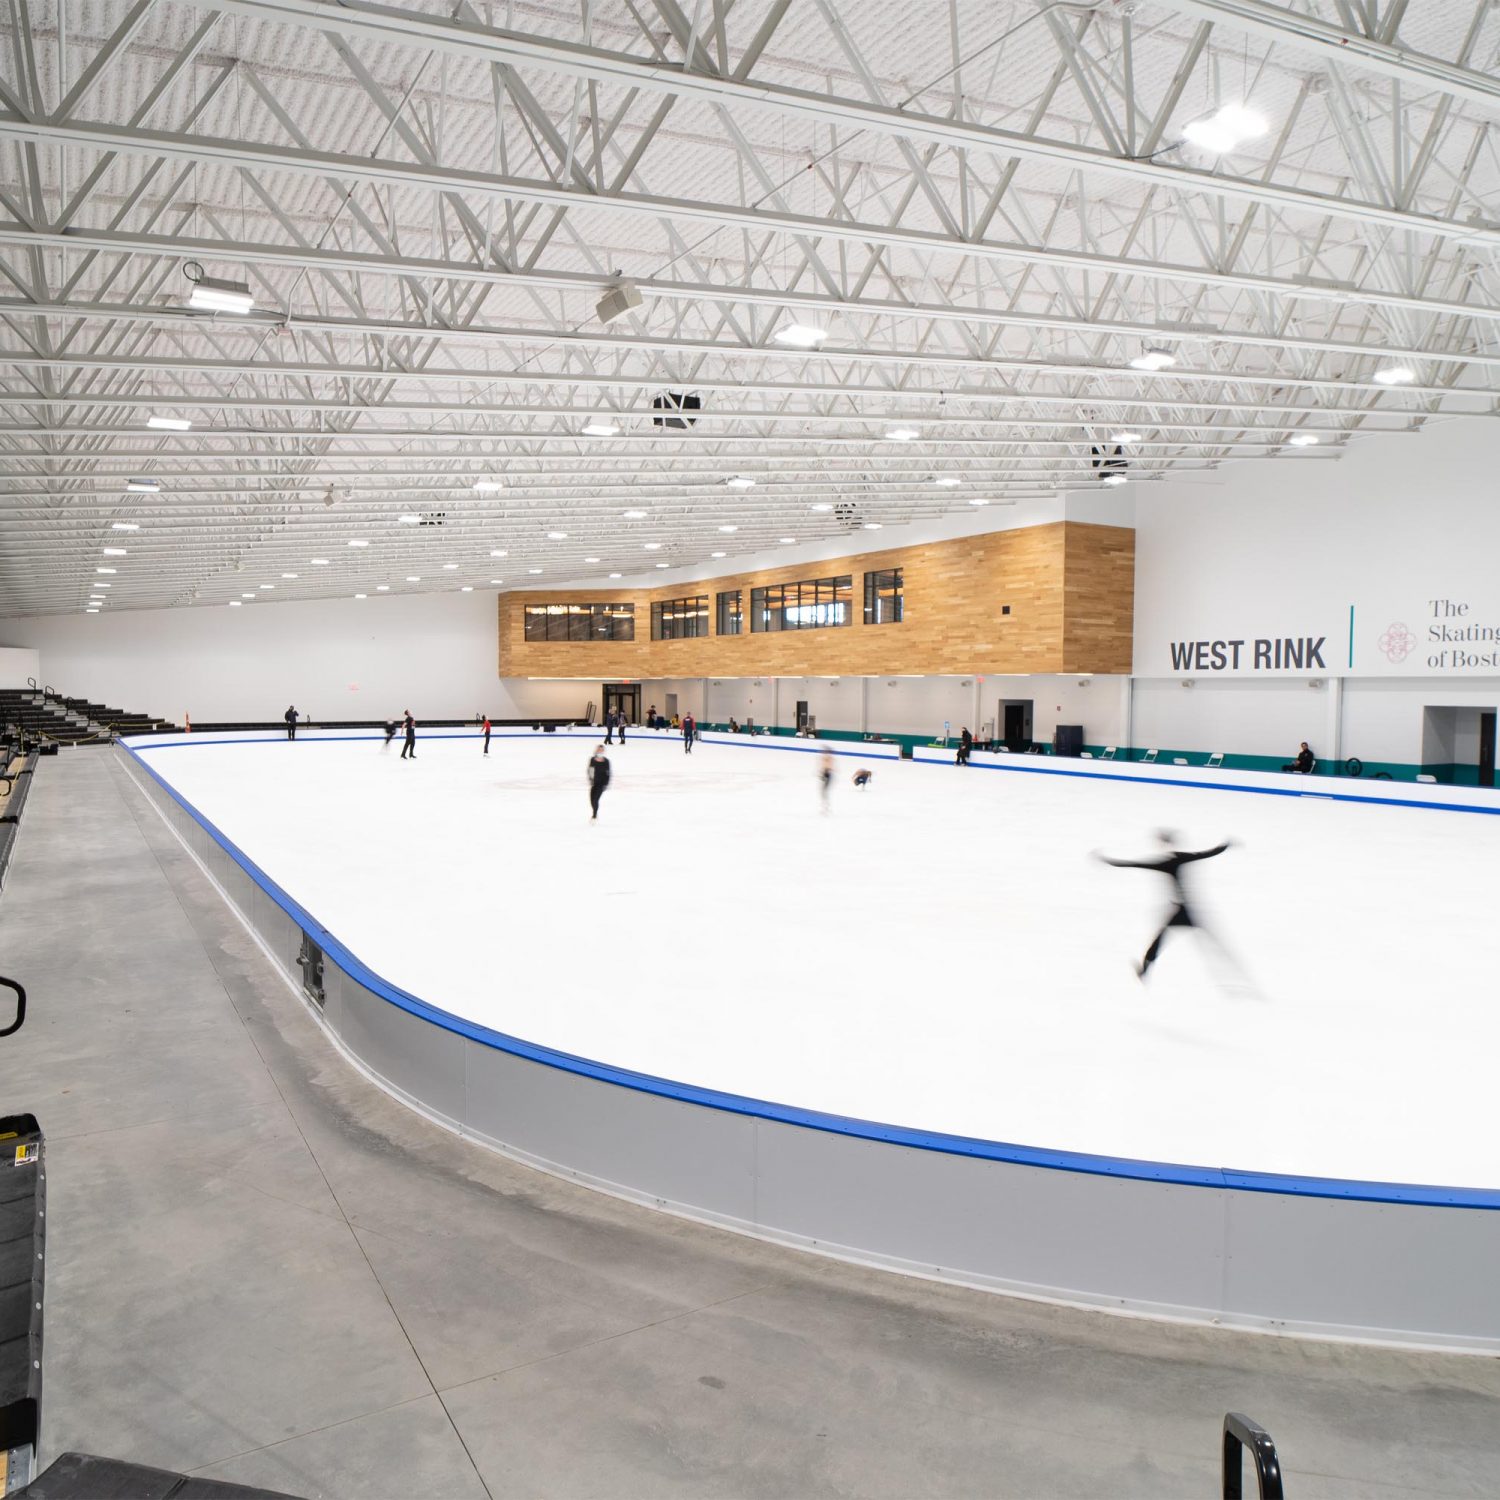 Boston Skating Club Interior Rink with Ice Skaters